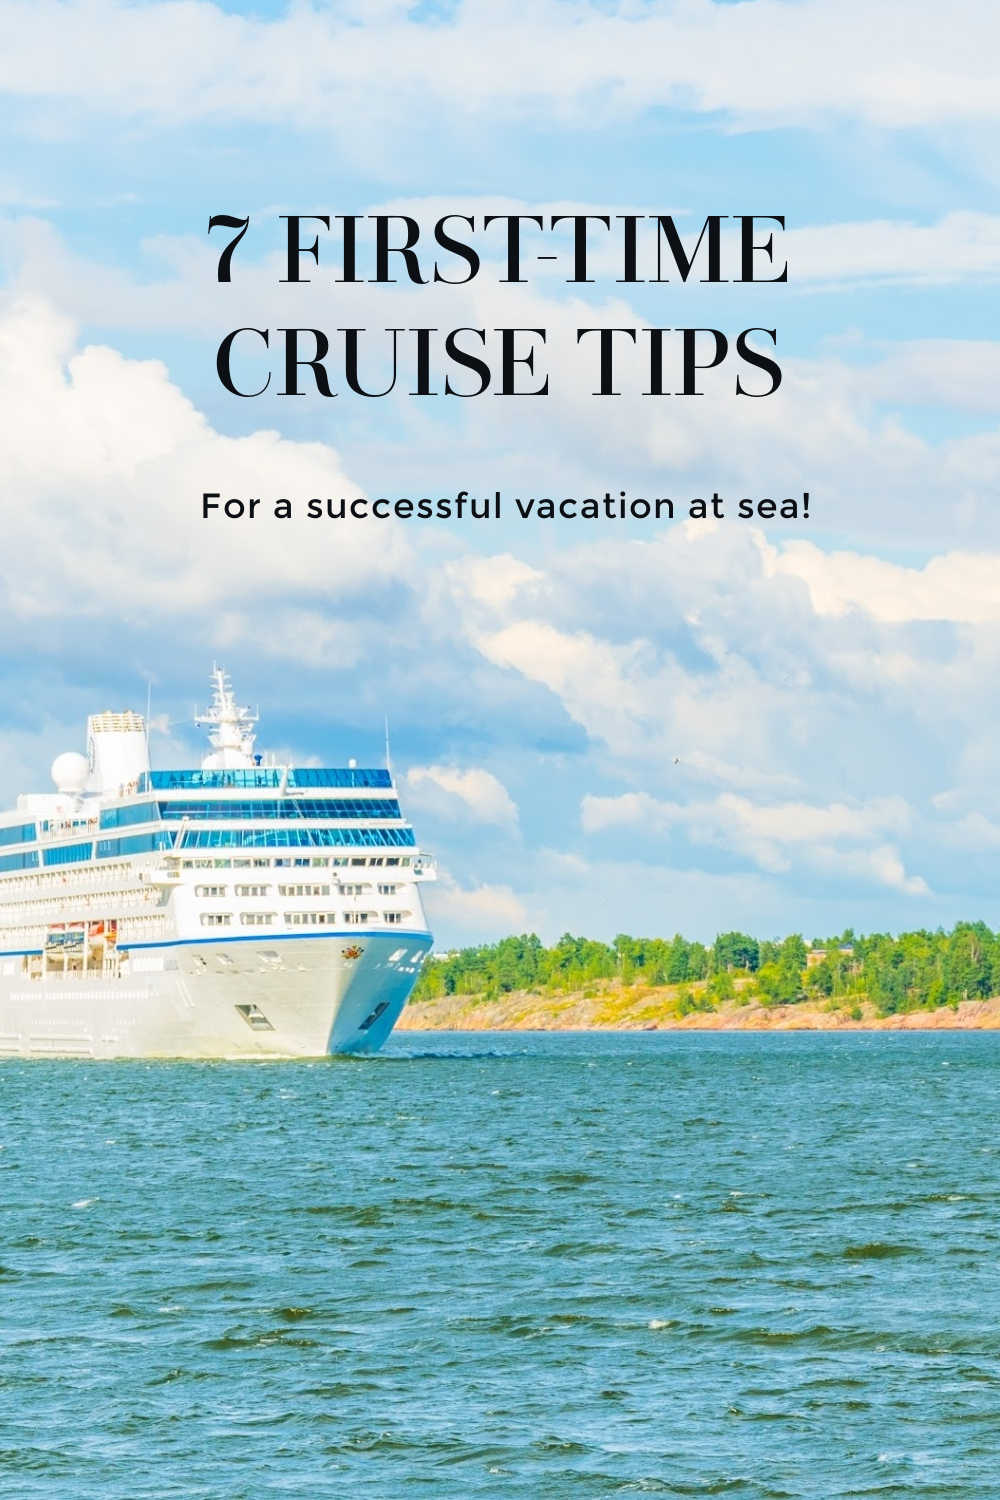 cruise tips for your first cruise